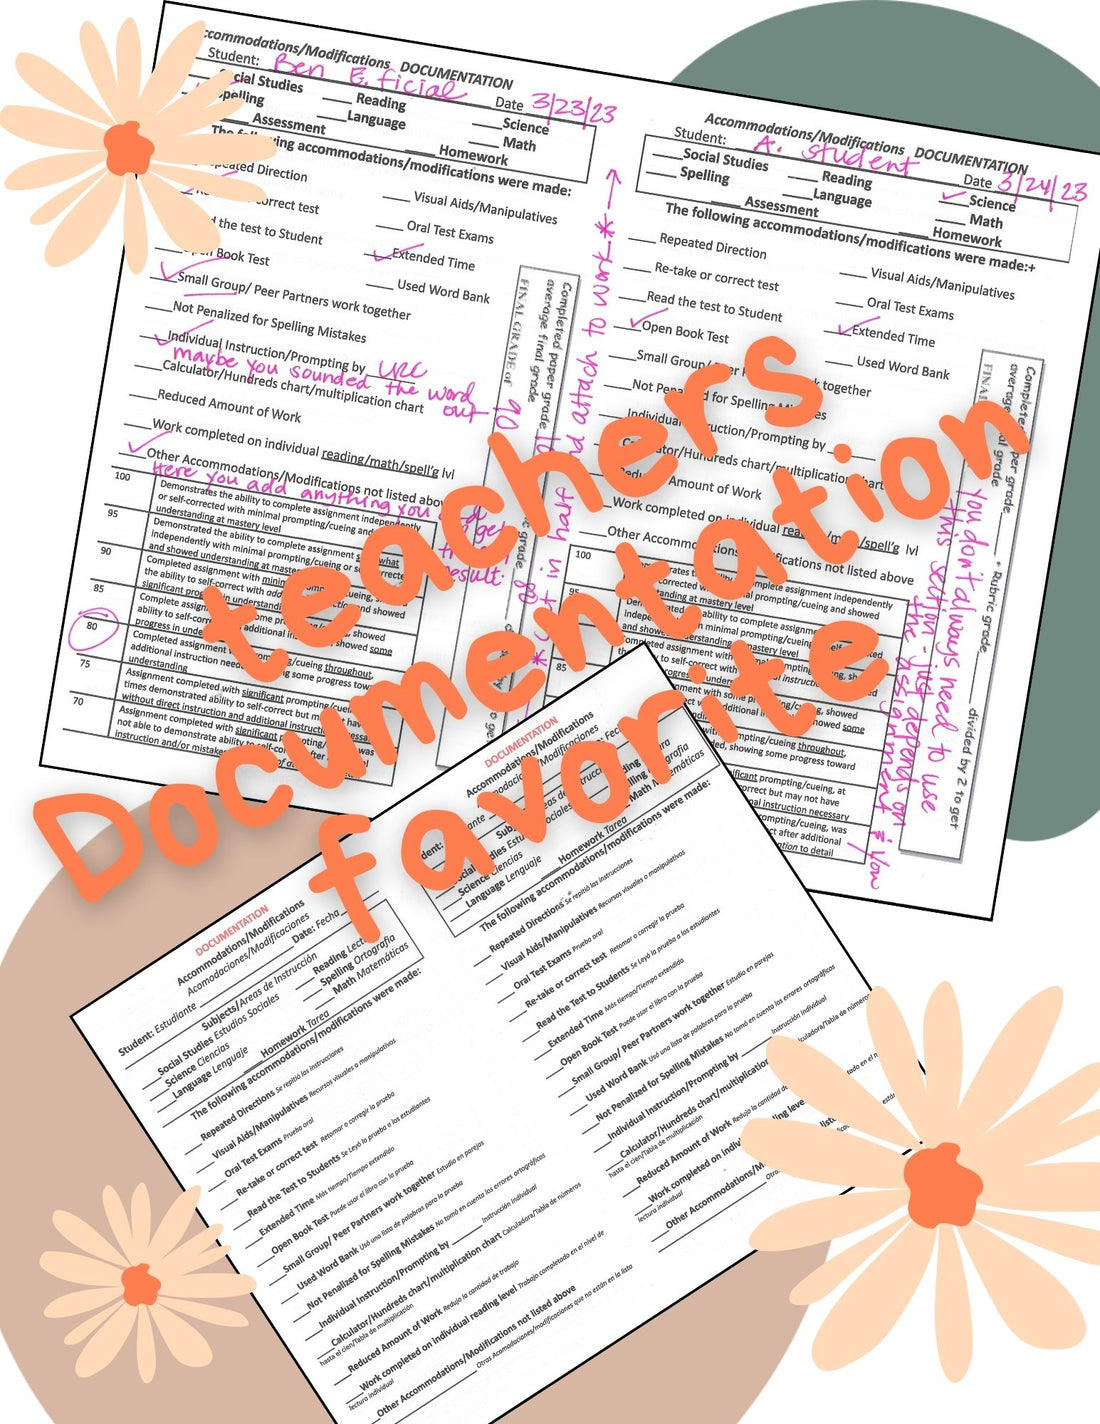 Documenting Accommodations and Modifications